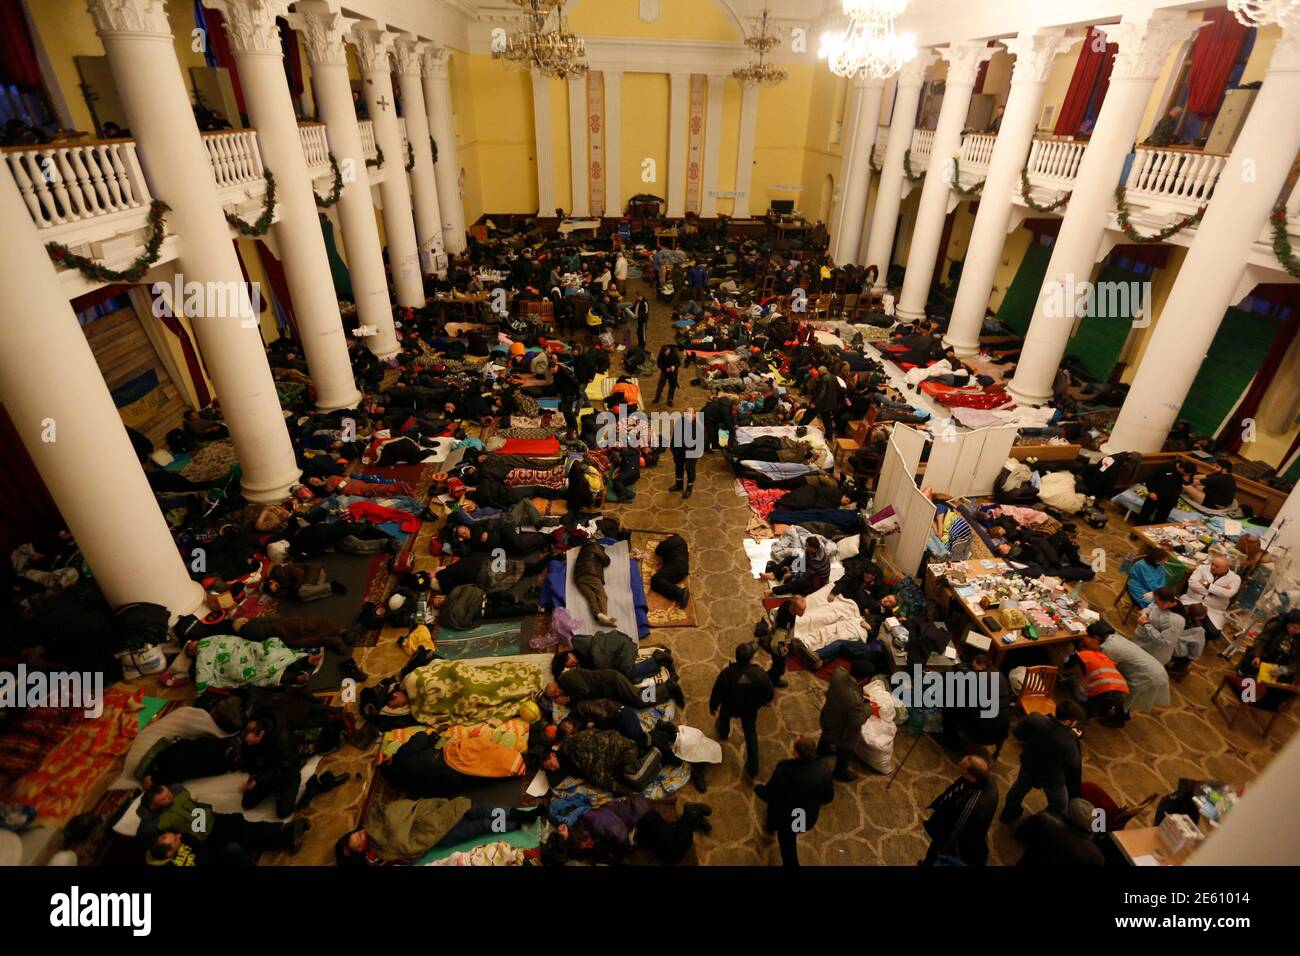 Anti-government protesters sleep in City Hall in Kiev February 21, 2014. Ukrainian President Viktor Yanukovich said on Friday a deal to resolve his country's political crisis had been reached with pro-European opposition leaders after the worst violence since Soviet times, but France urged caution. REUTERS/Baz Ratner (UKRAINE - Tags: POLITICS CIVIL UNREST) Stock Photo